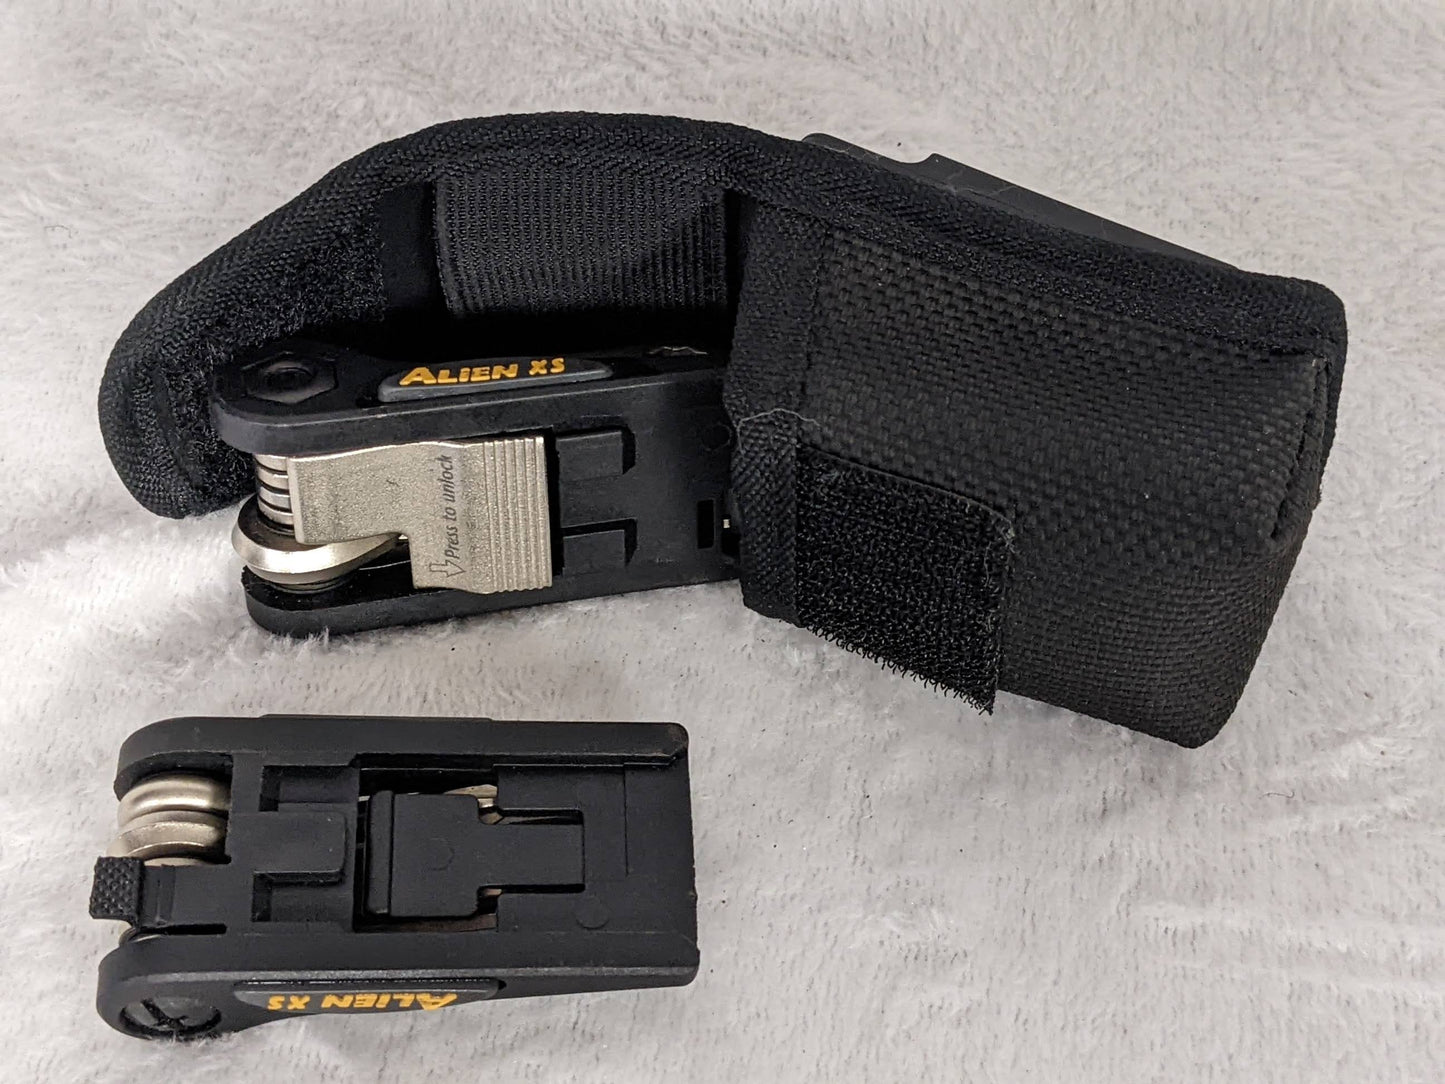 Topeak Alien XS Bicycle Belt Tool Travel Kit Size 12 Tools Color Black Condition Used